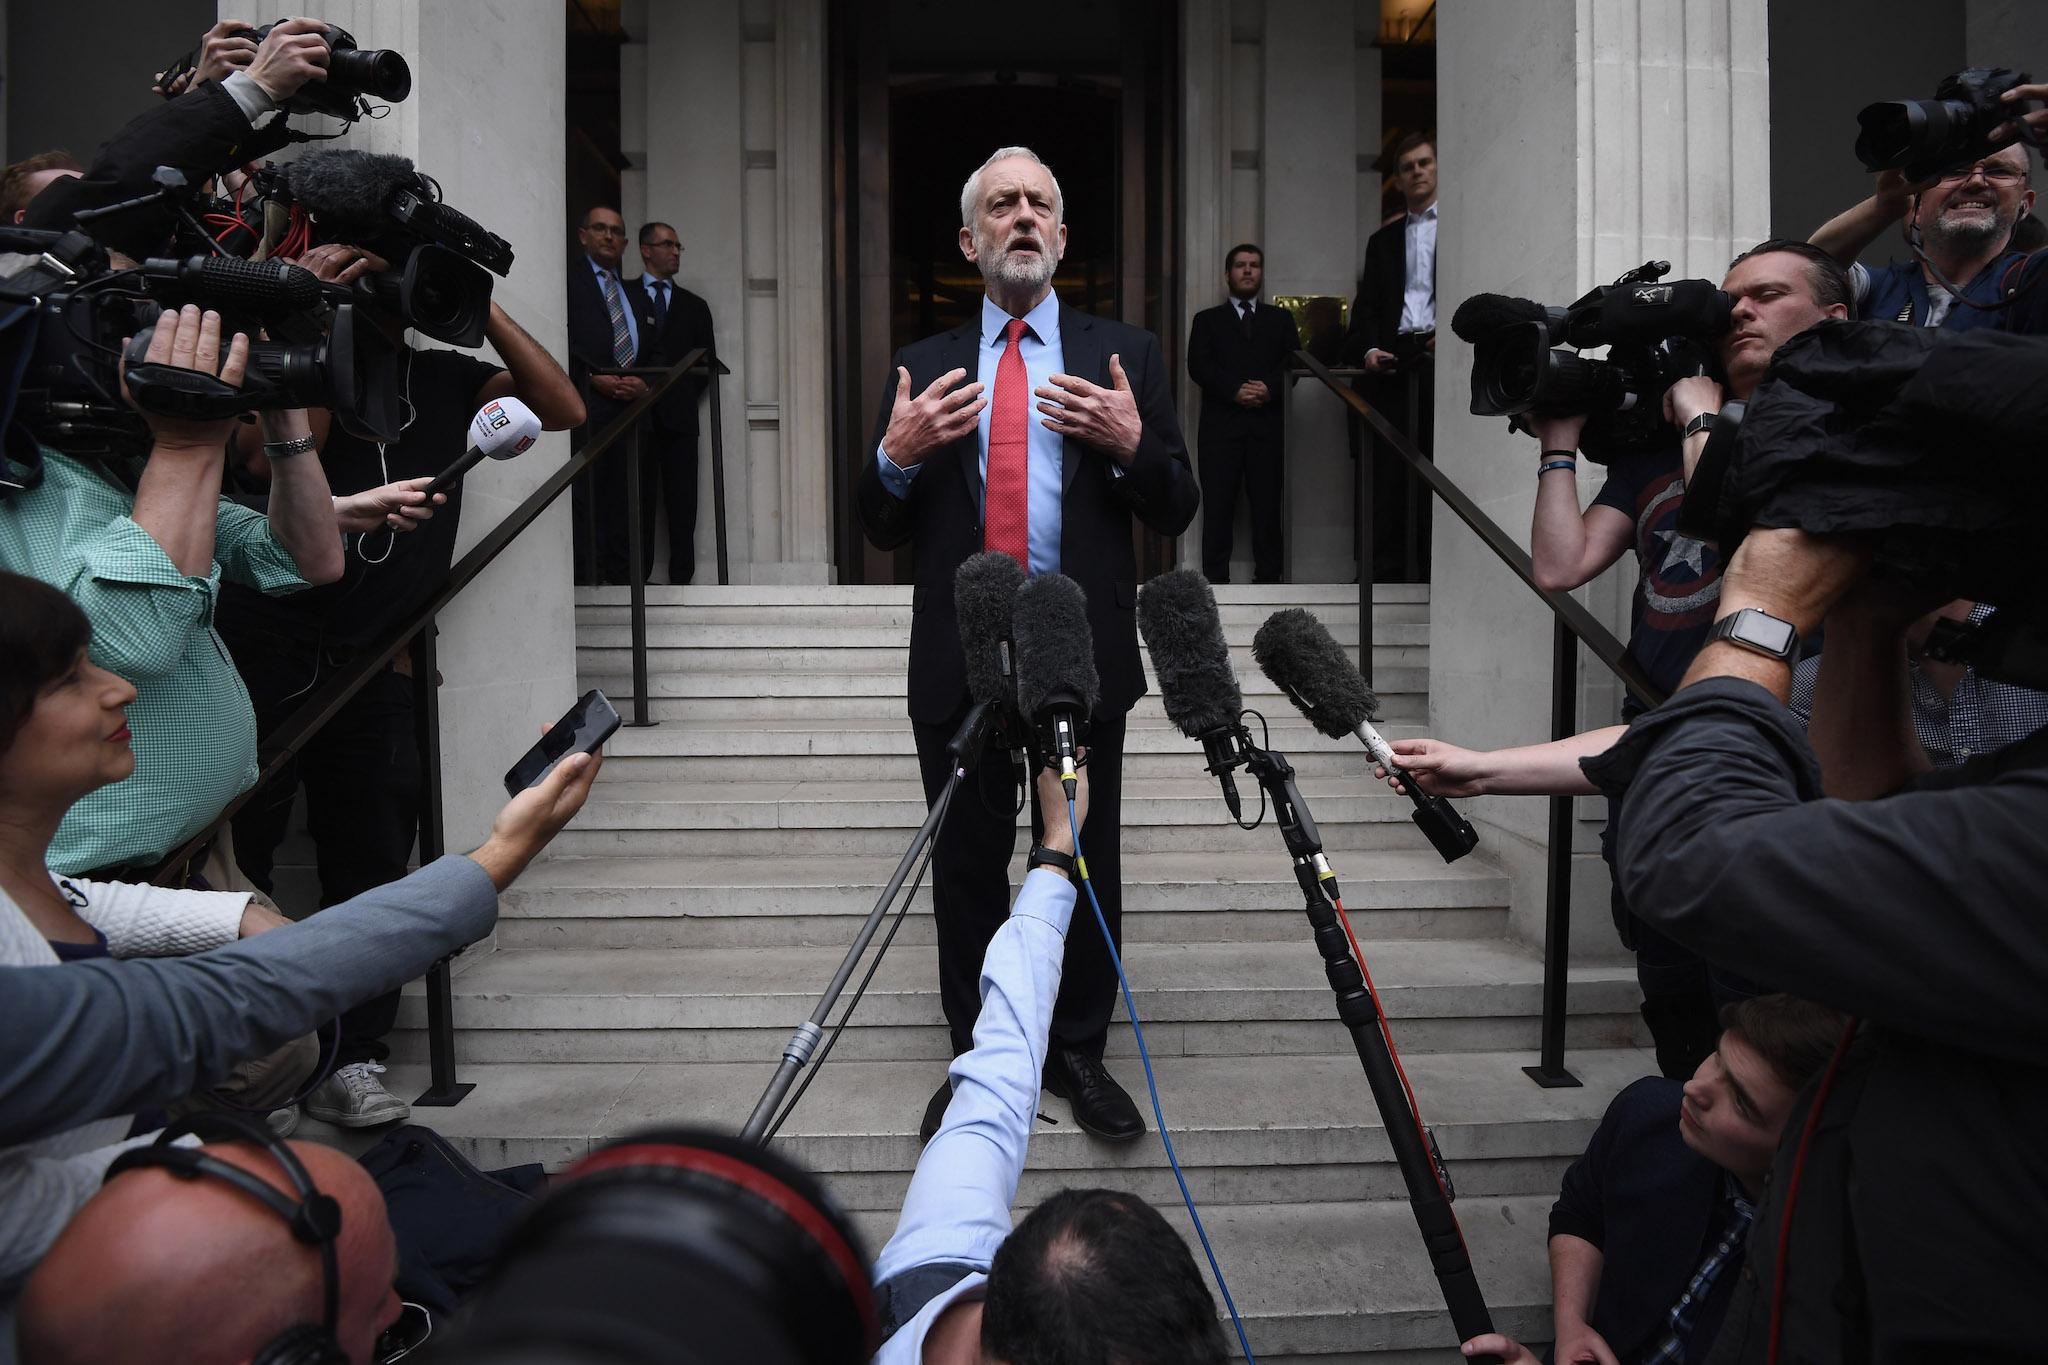 The reports says a number of news outlets have been ‘hostile’ towards the Labour leader